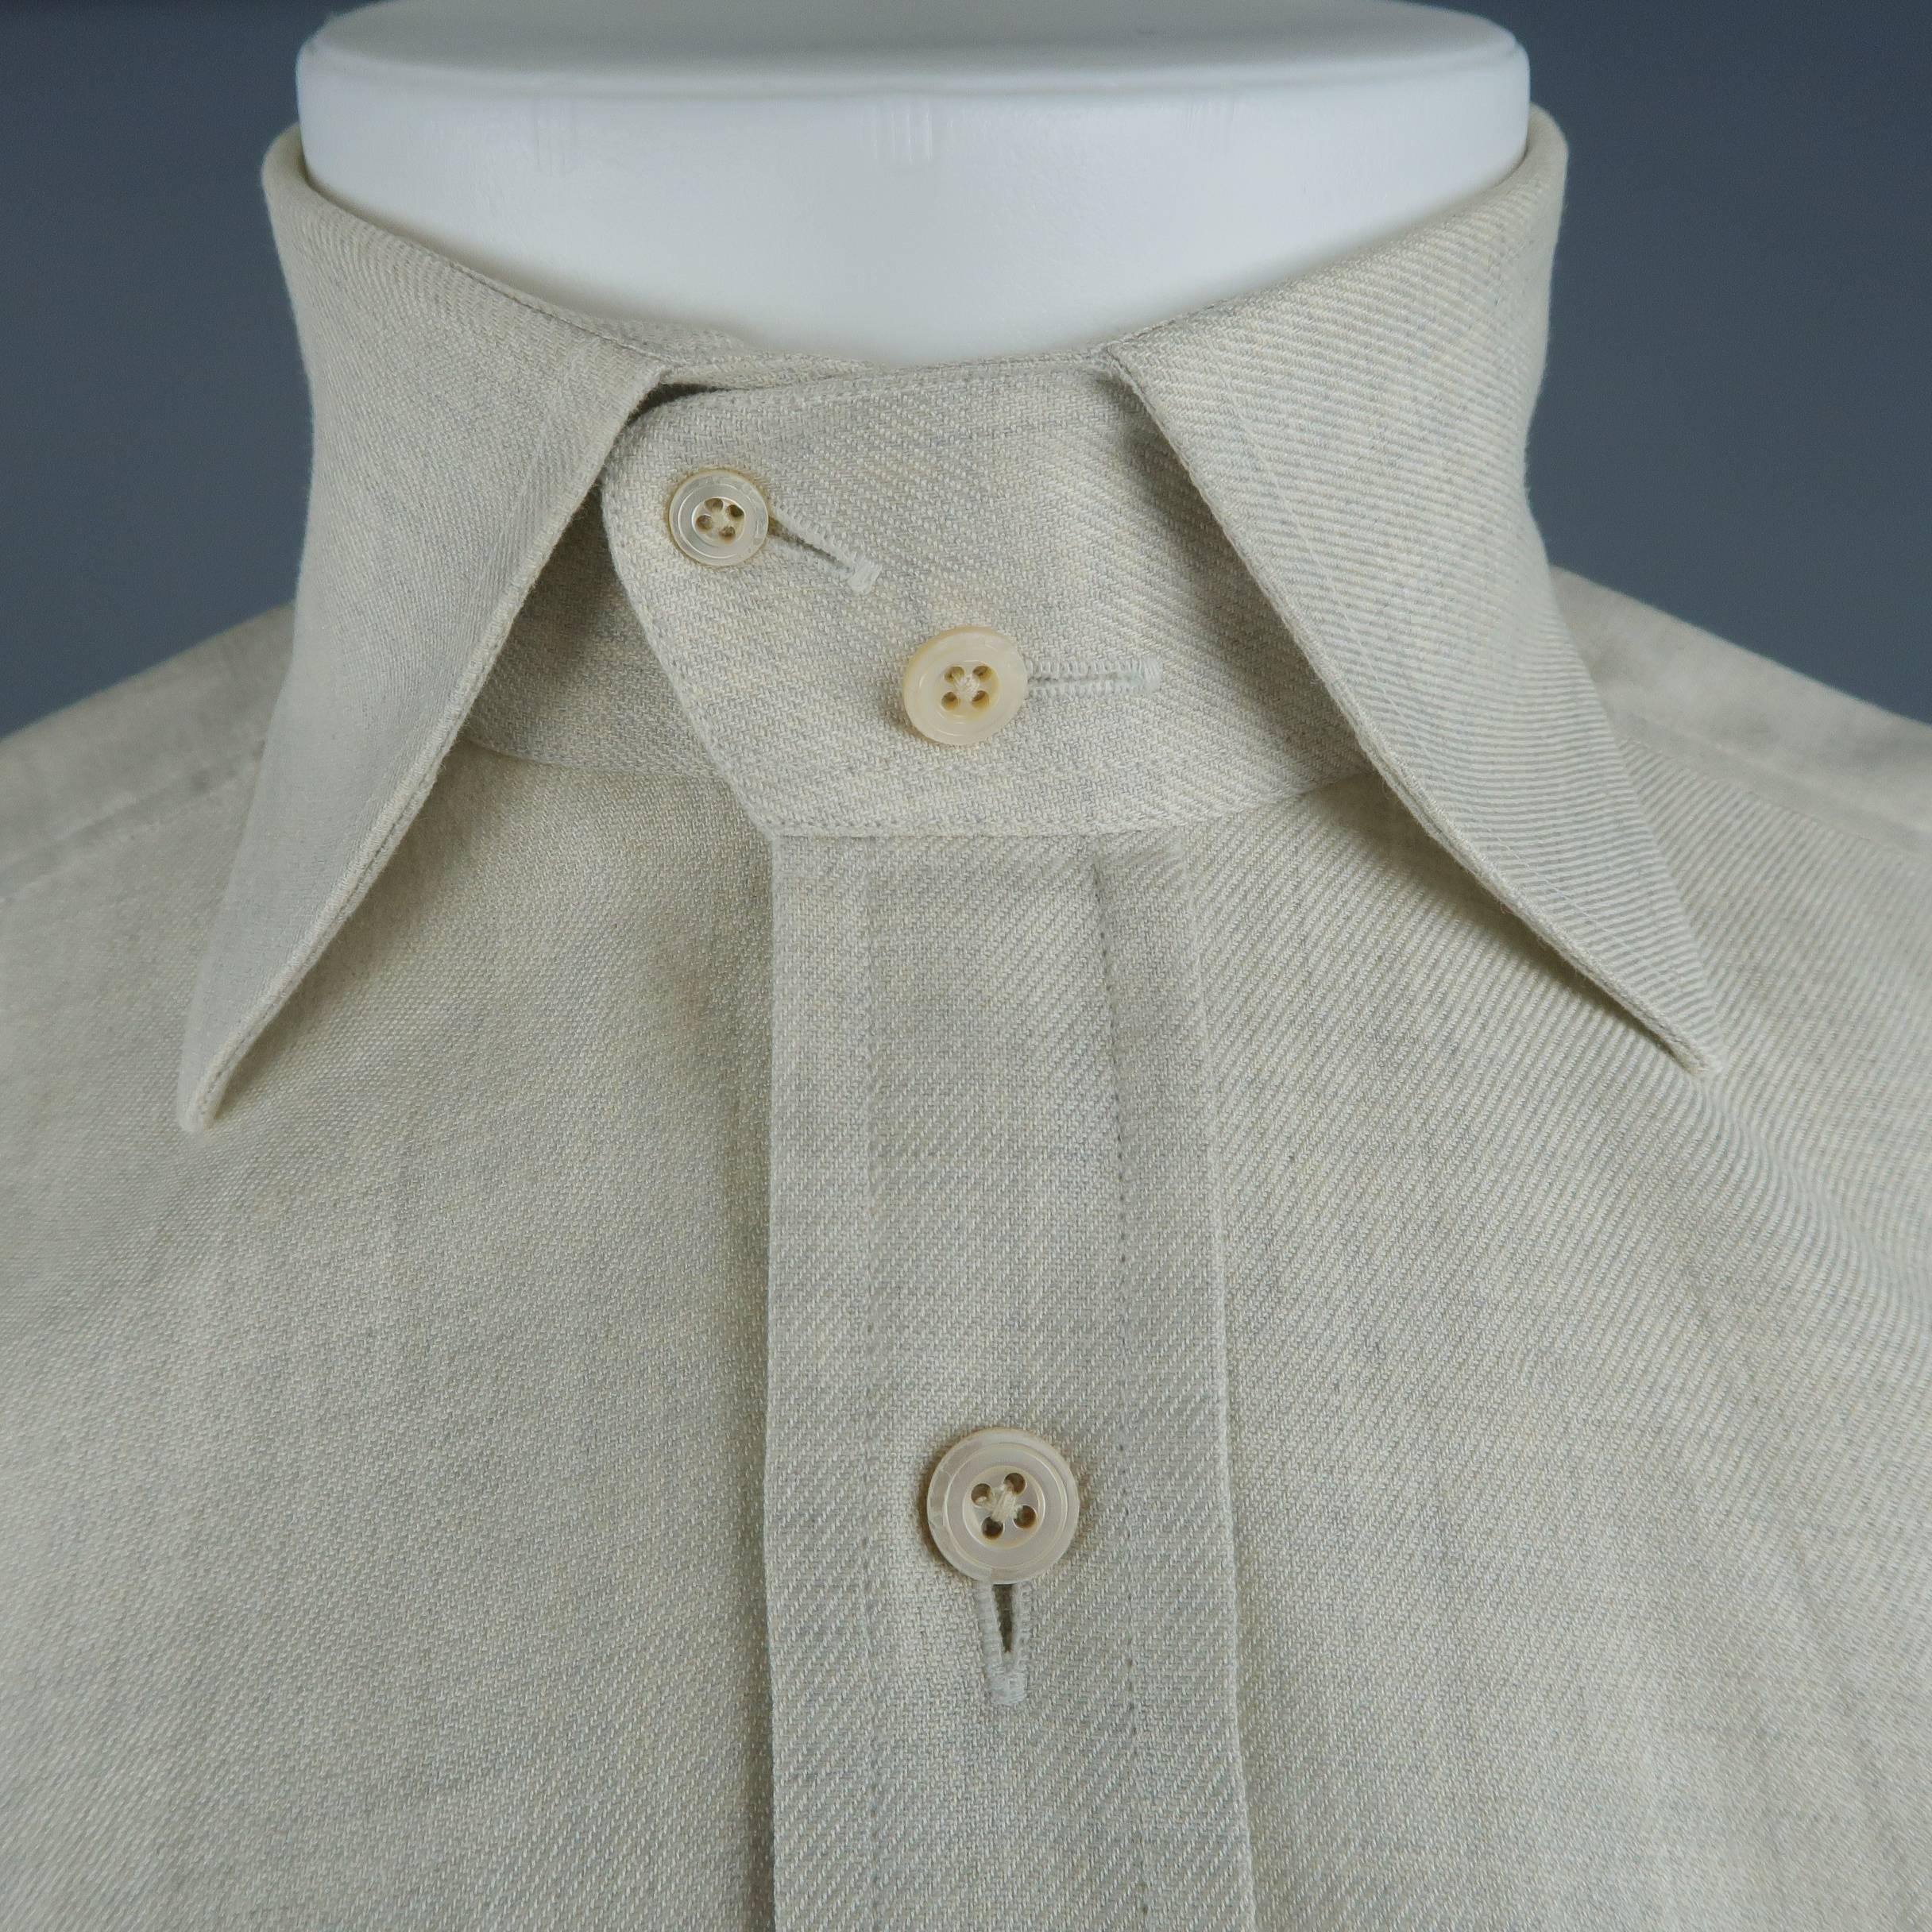 TOM FORD dress shirt comes in a textured beige cotton with a spread two button over collar, double breast pockets, and two button cuffs. Broken button. As-is. Made in Italy.
 
Good  Pre-Owned Condition.
Marked: 39/15.5
 
Measurements:
 
Shoulder: 17